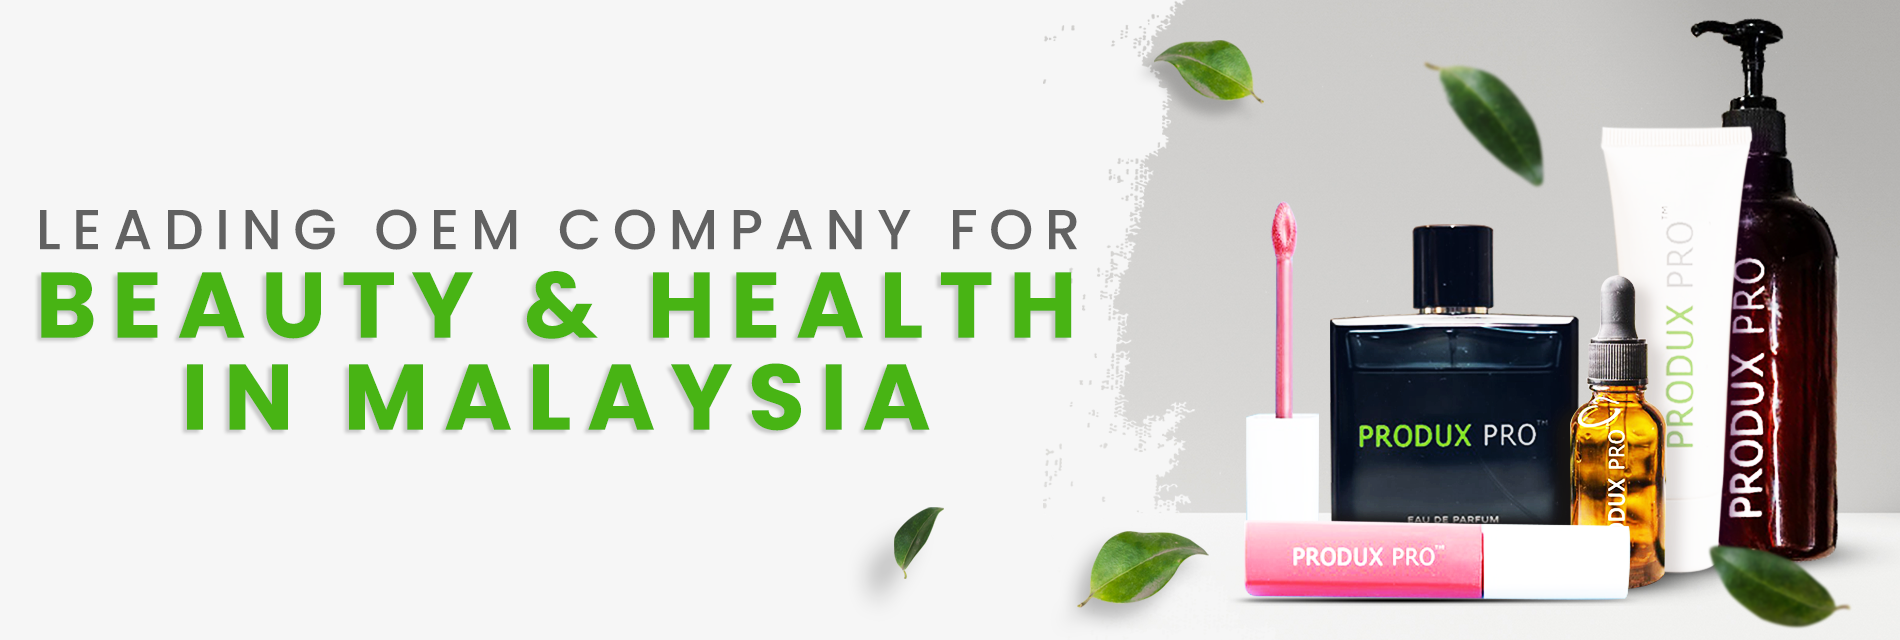 Produx-Pro_LEADING-OEM-COMPANY-FOR-BEAUTY-_-HEALTH-IN-MALAYSIA-1.png